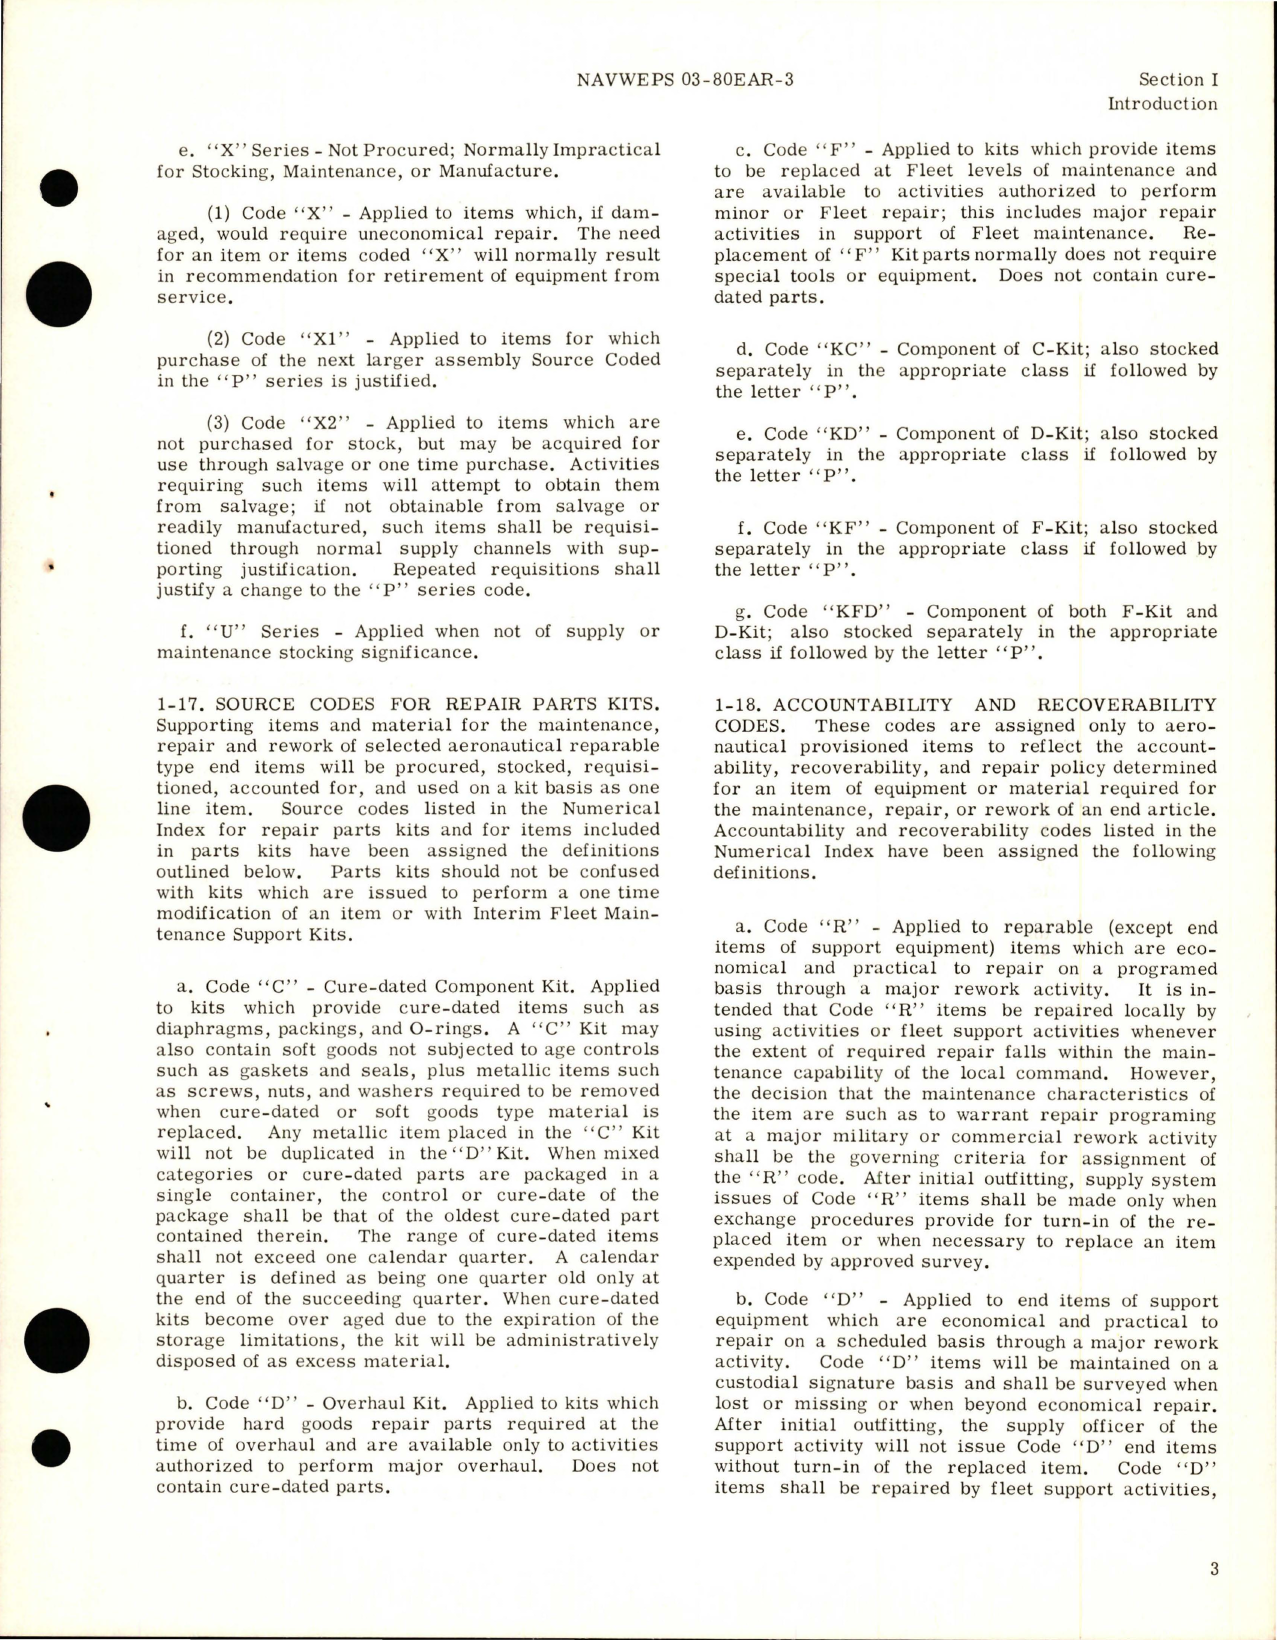 Sample page 7 from AirCorps Library document: Illustrated Parts for Two and One-Half Inch Diameter Shutoff Airflow Regulator - Part 106616 and 106616-1-1